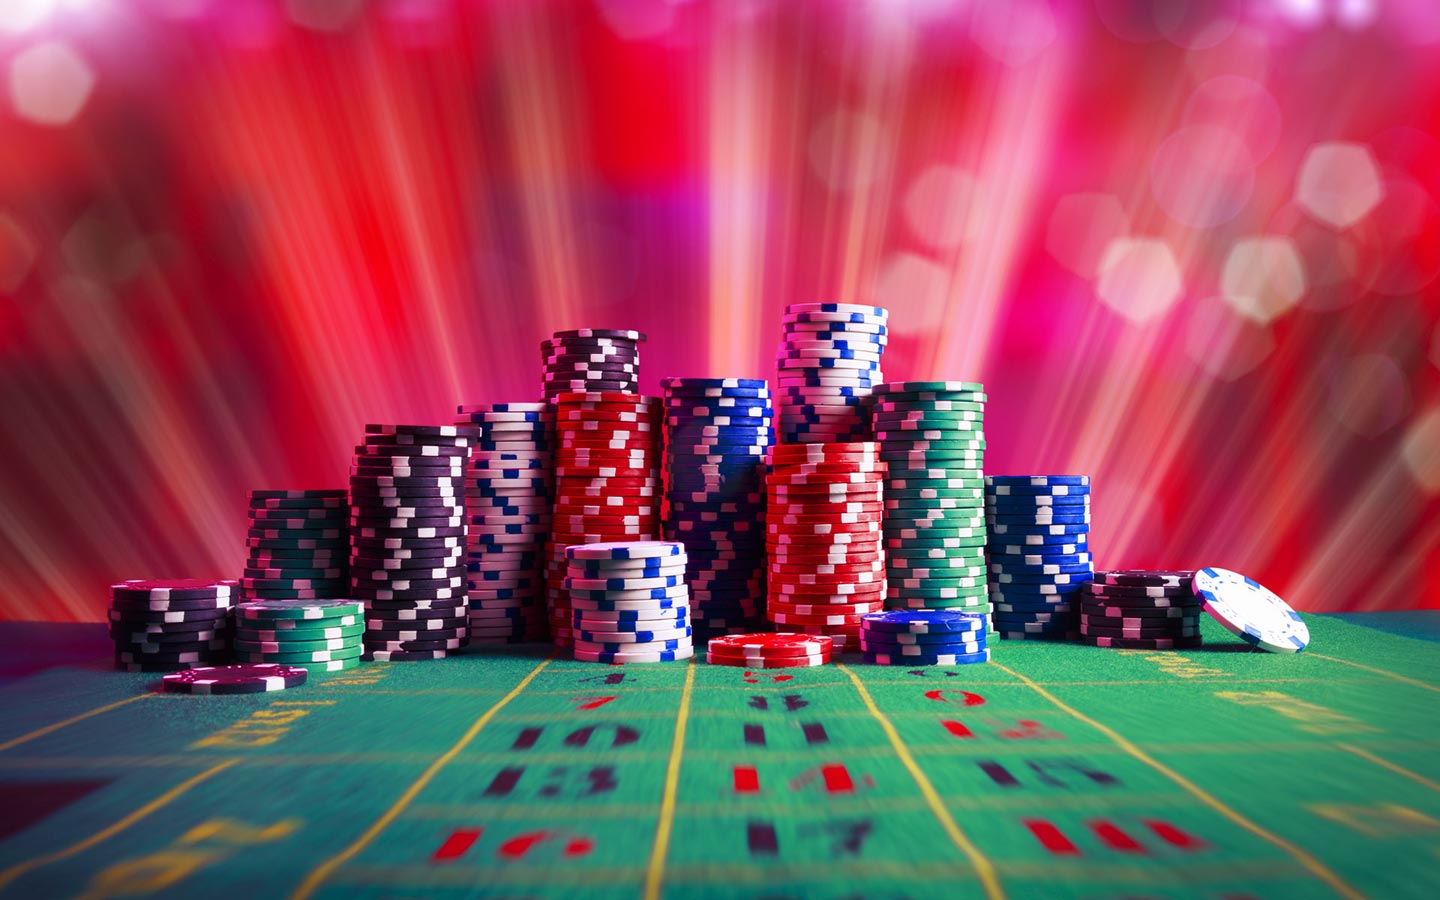 5 Brilliant Ways To Teach Your Audience About online casino